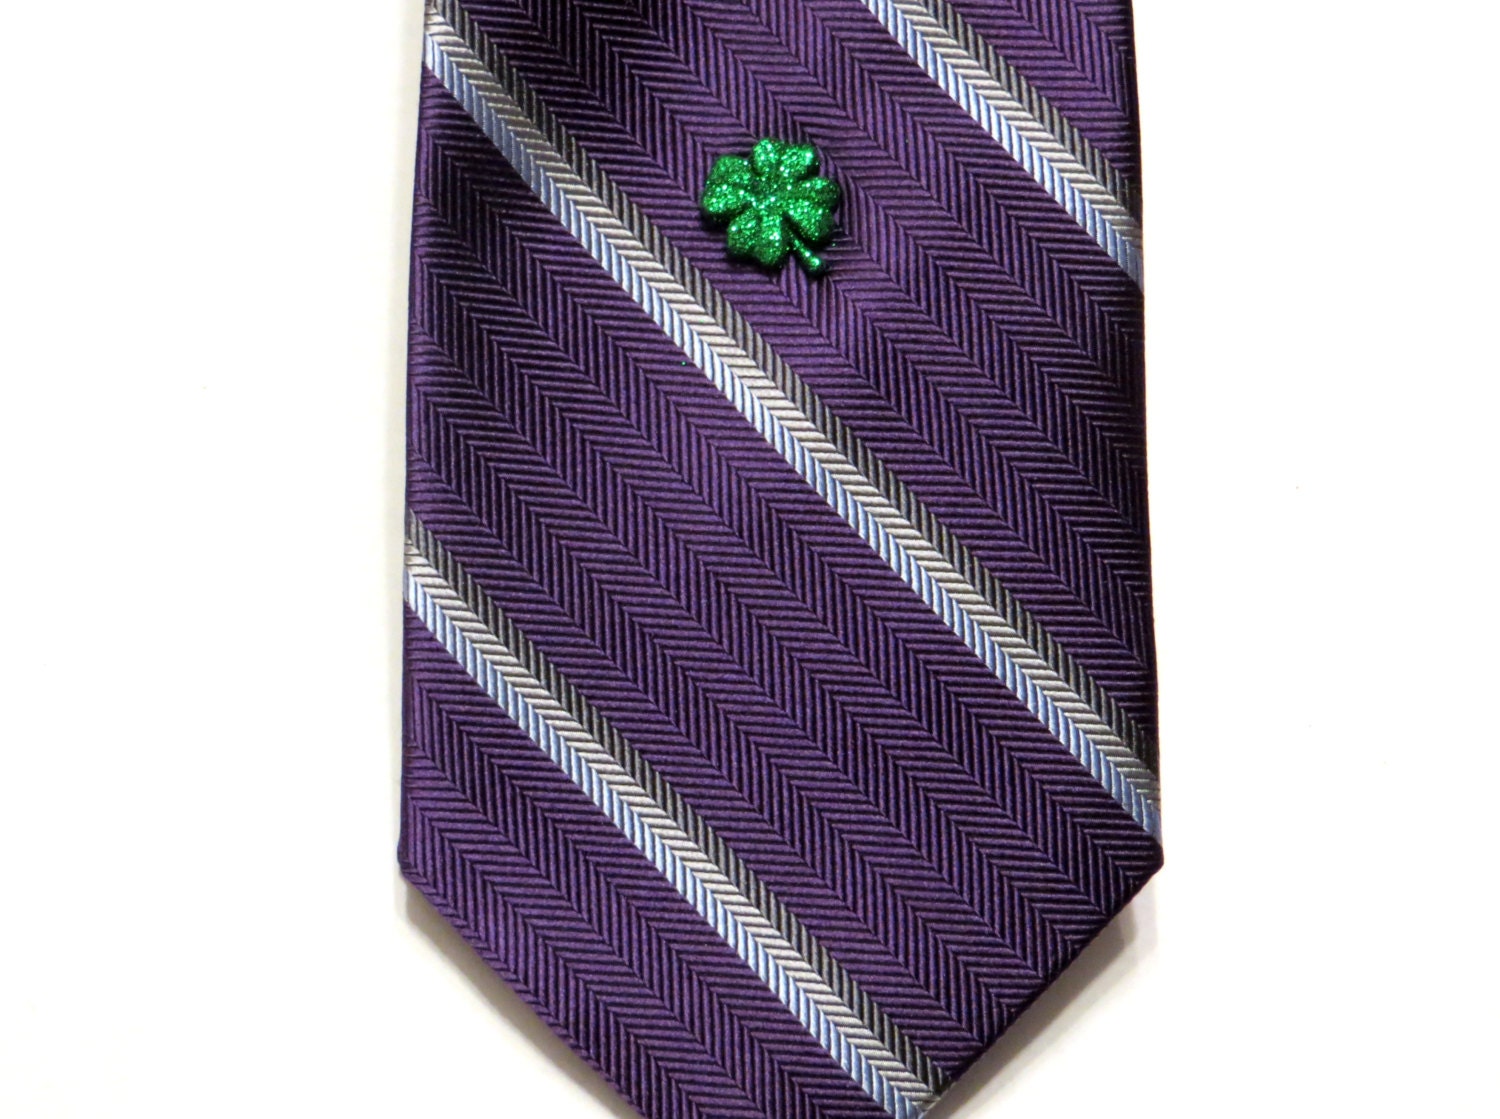 St Patrick's Day Shamrock Tie Tack - Green Four Leaf Clover Saint Patricks Day Holiday Accessory - Gift